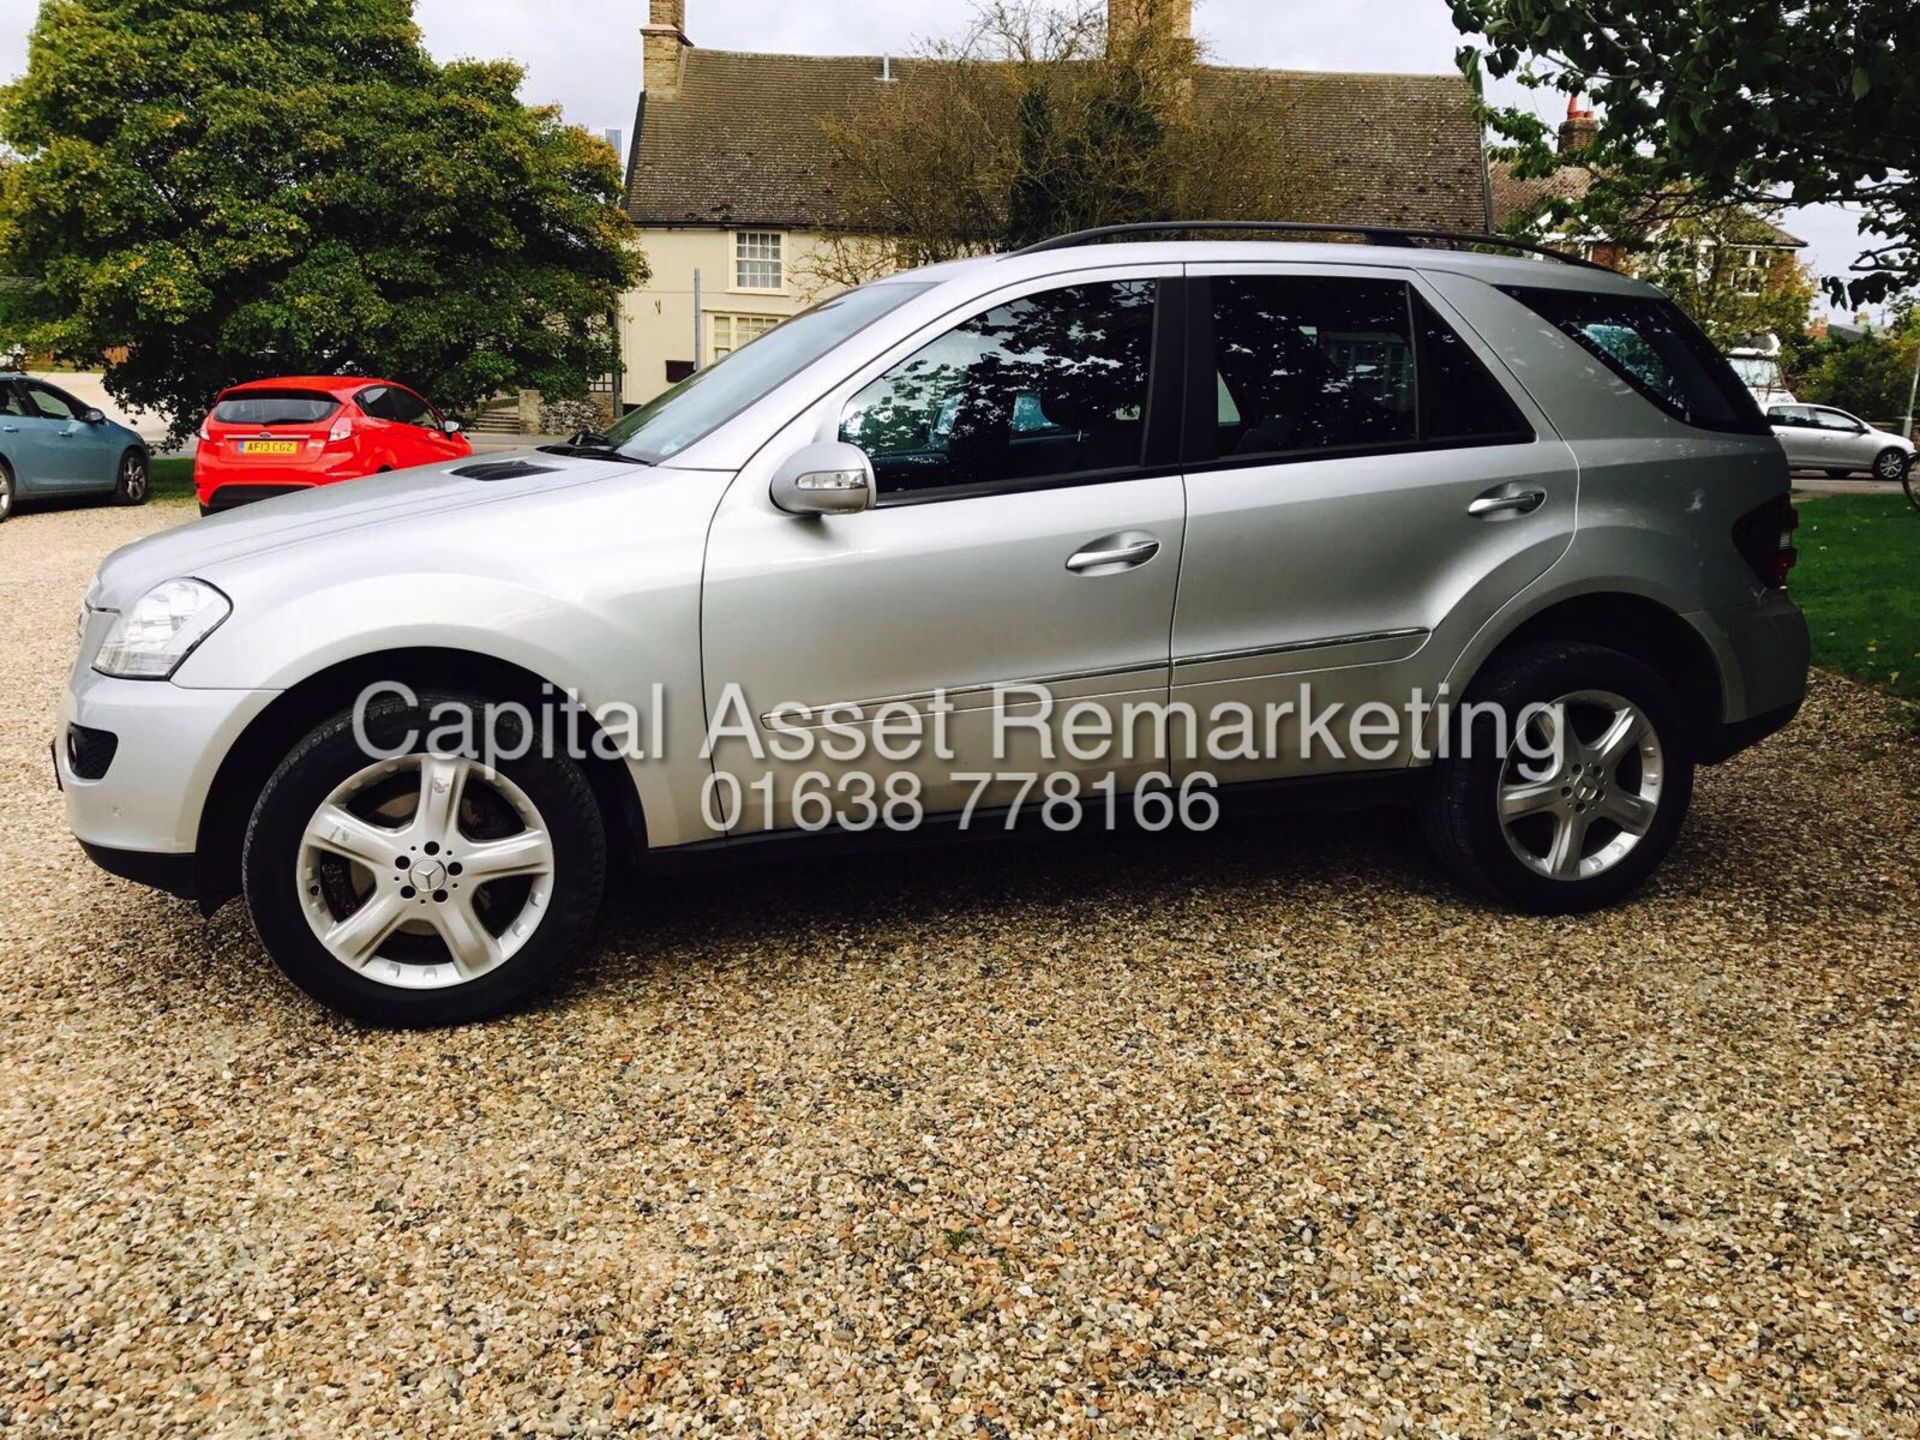 MERCEDES ML280CDI "EDITION S" AUTO 4MATIC (2008MODEL) 1 PREVIOUS OWNER FSH (NO VAT TO PAY ON HAMMER) - Image 7 of 16